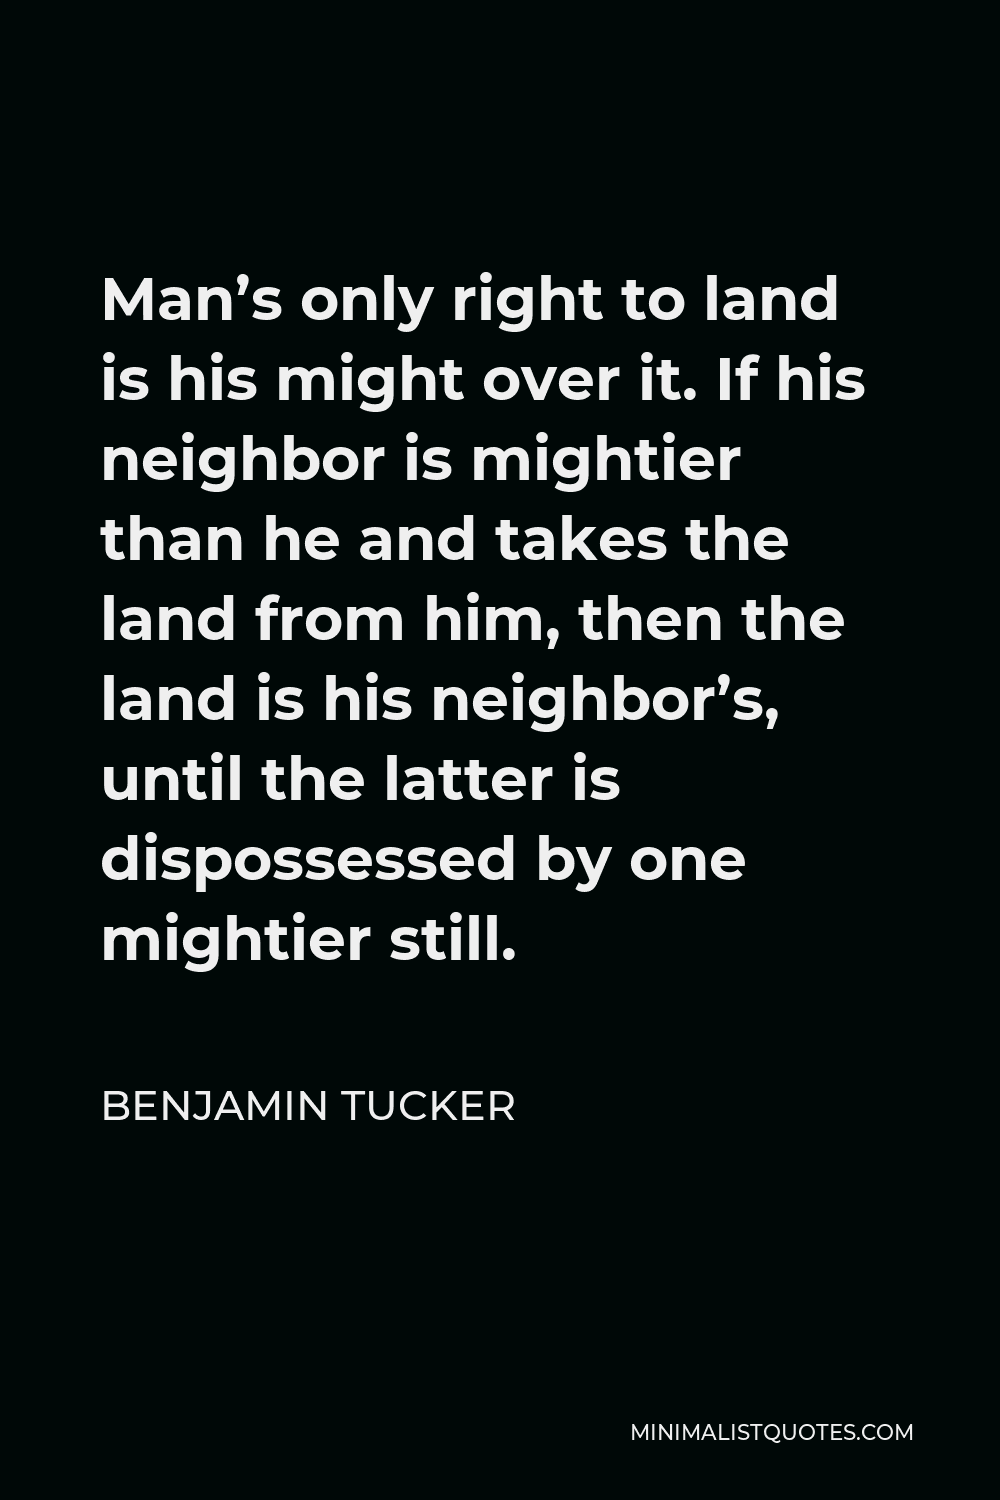 Benjamin Tucker Quote - Man’s only right to land is his might over it. If his neighbor is mightier than he and takes the land from him, then the land is his neighbor’s, until the latter is dispossessed by one mightier still.